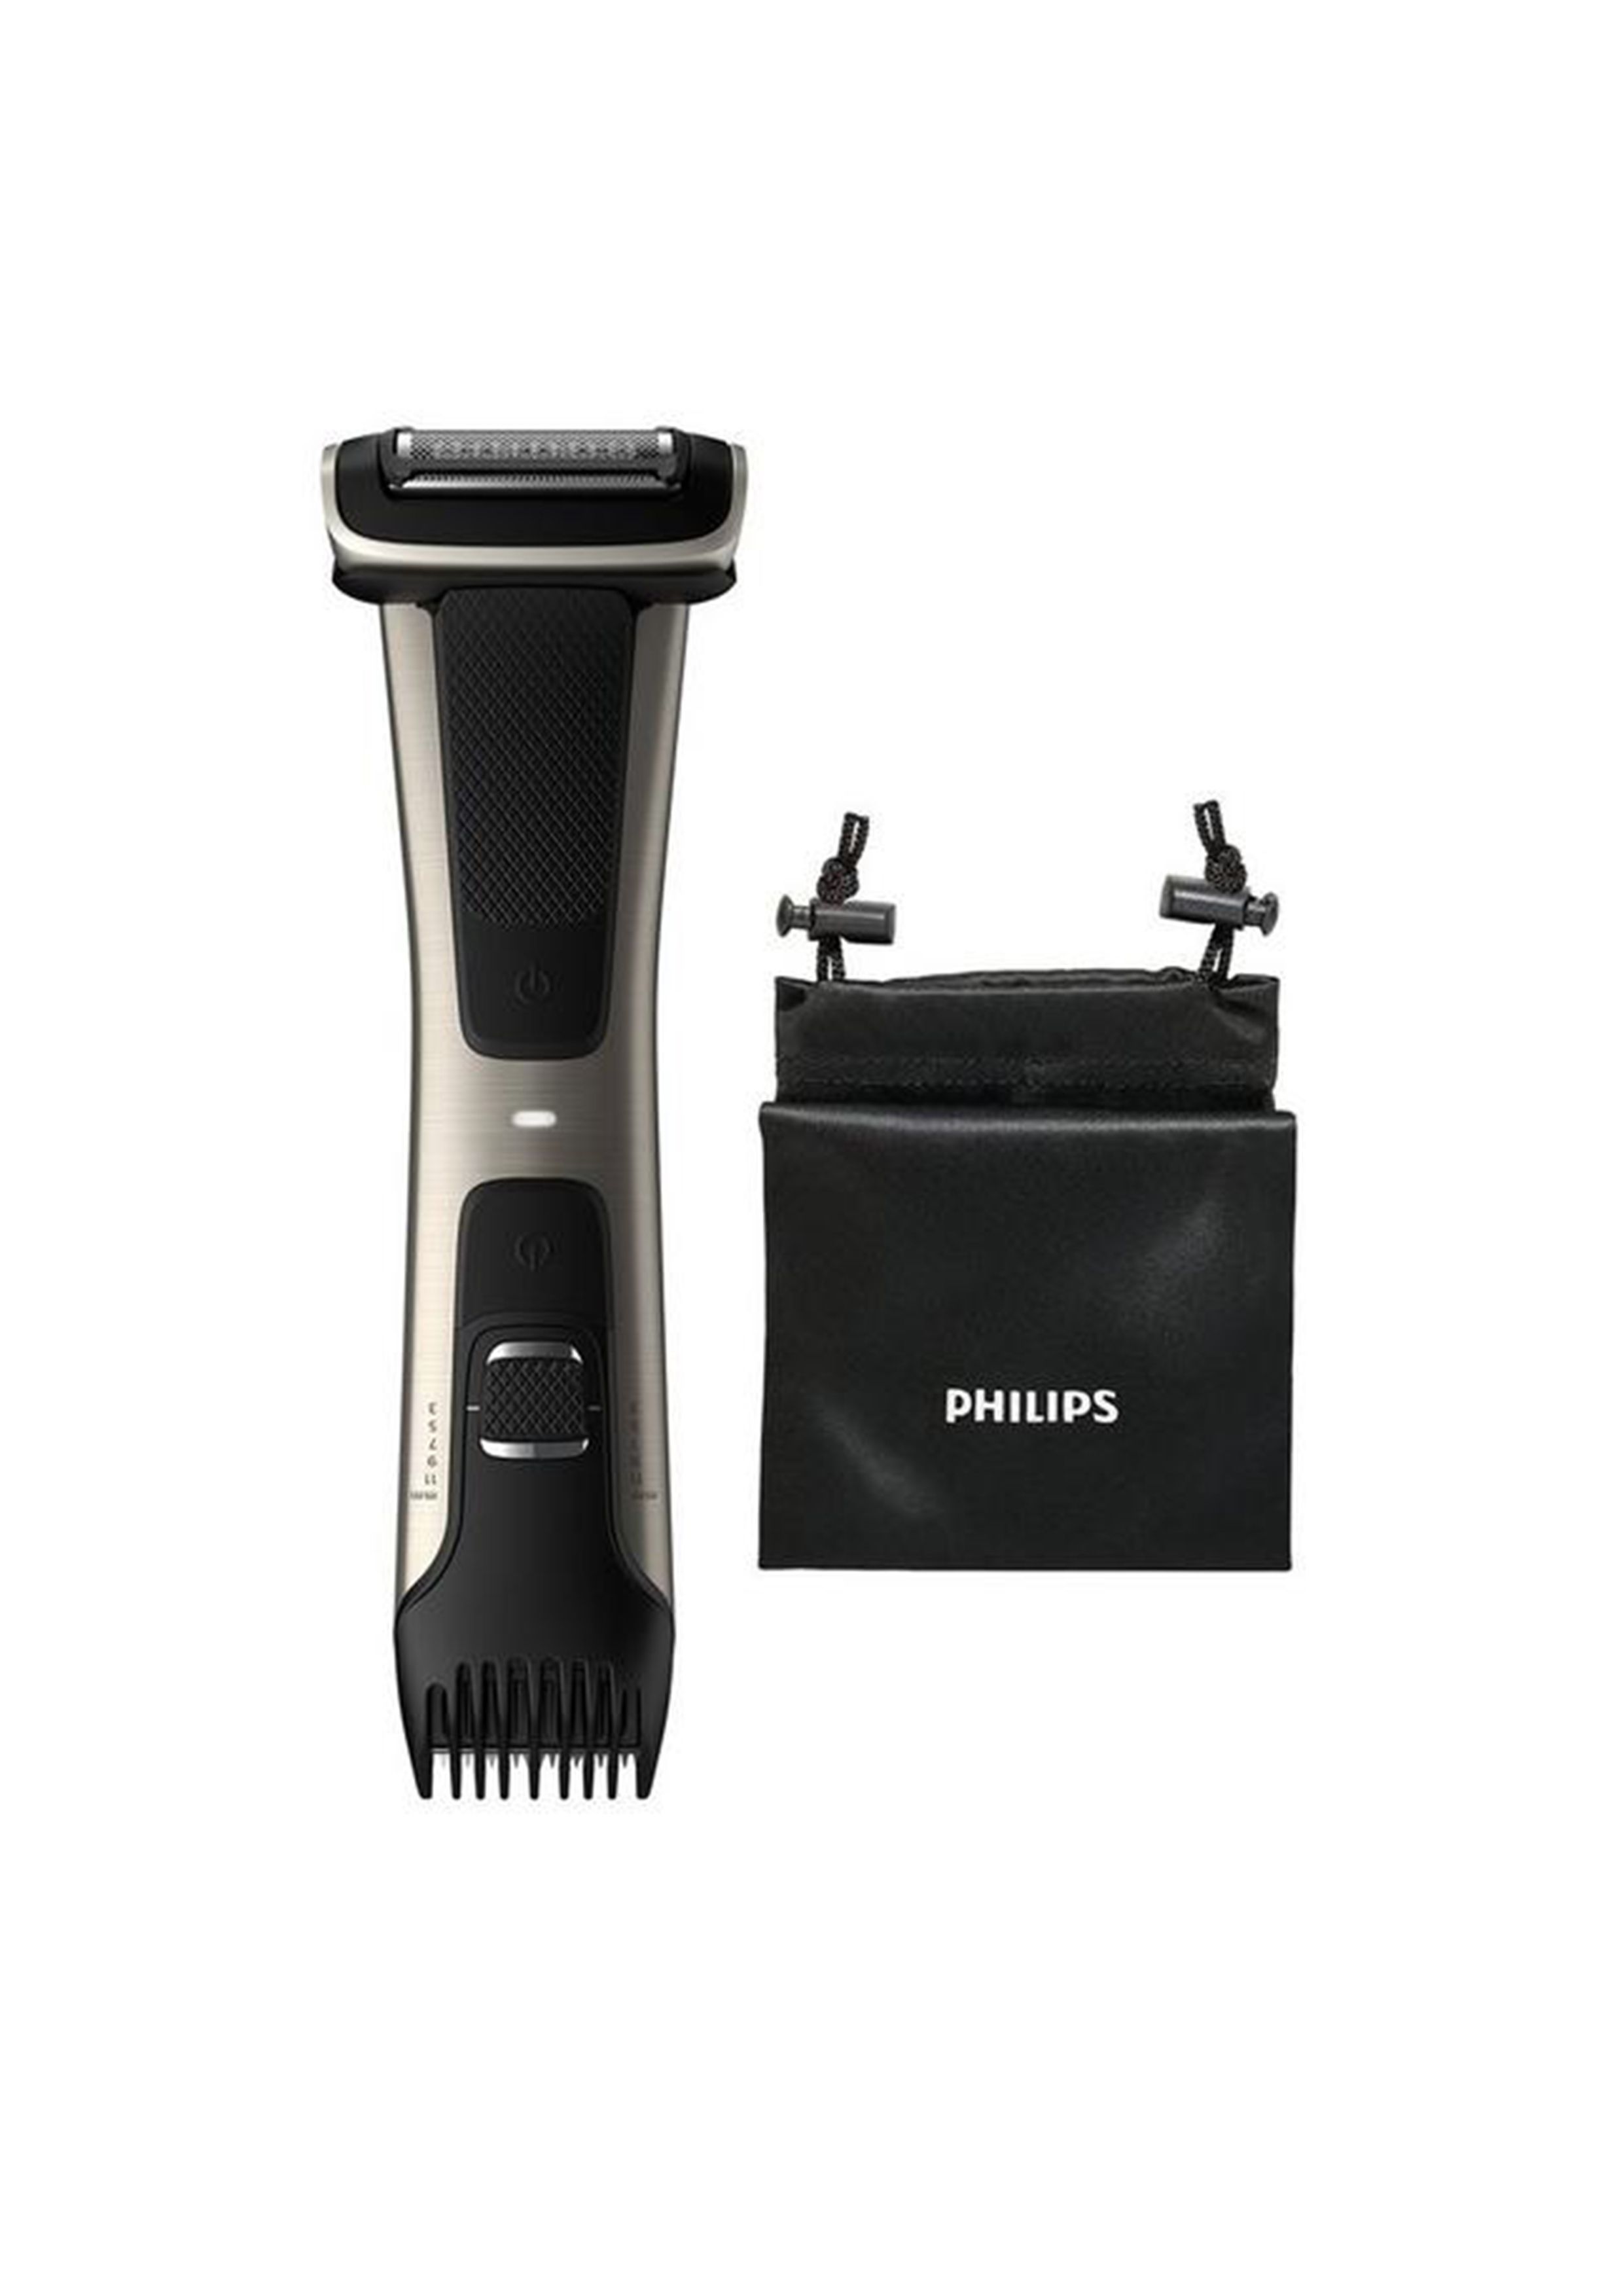 Professional Hair Clippers Electric Hair Body Trimmers Cutting Machine Tools UK 